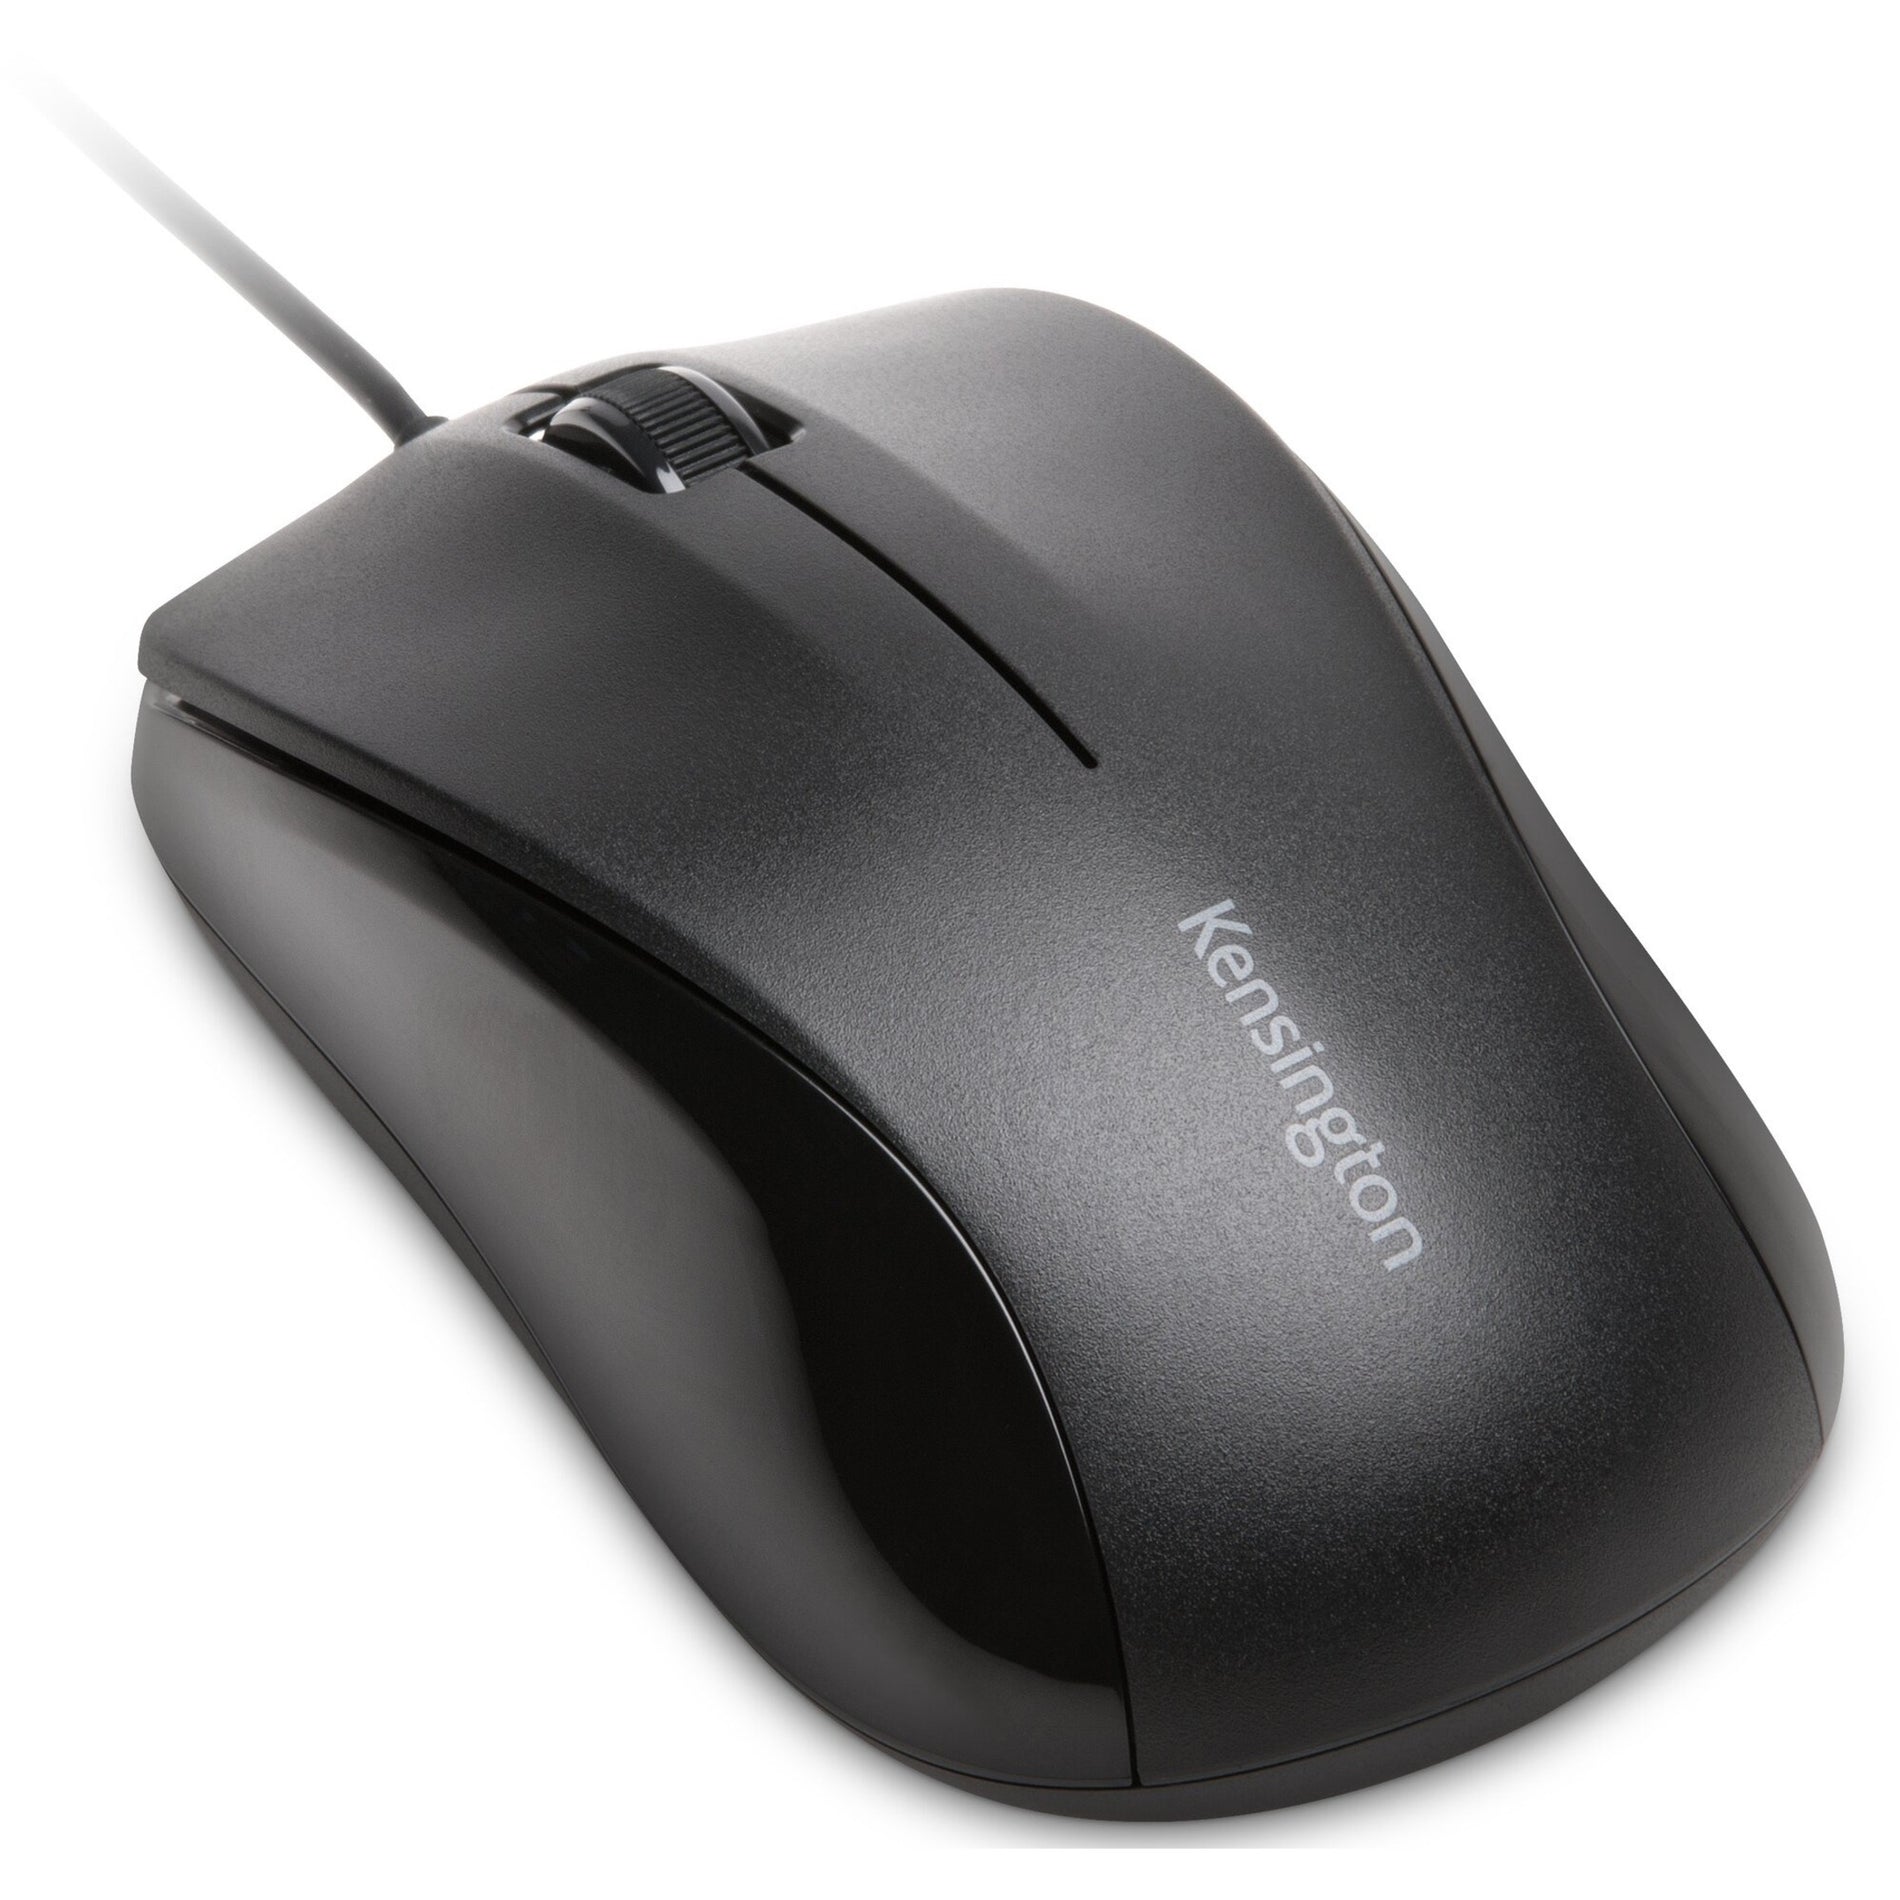 Kensington K72110WW Mouse for Life USB Three-Button, Ergonomic Fit, Scroll Wheel, Optical, PC Compatible